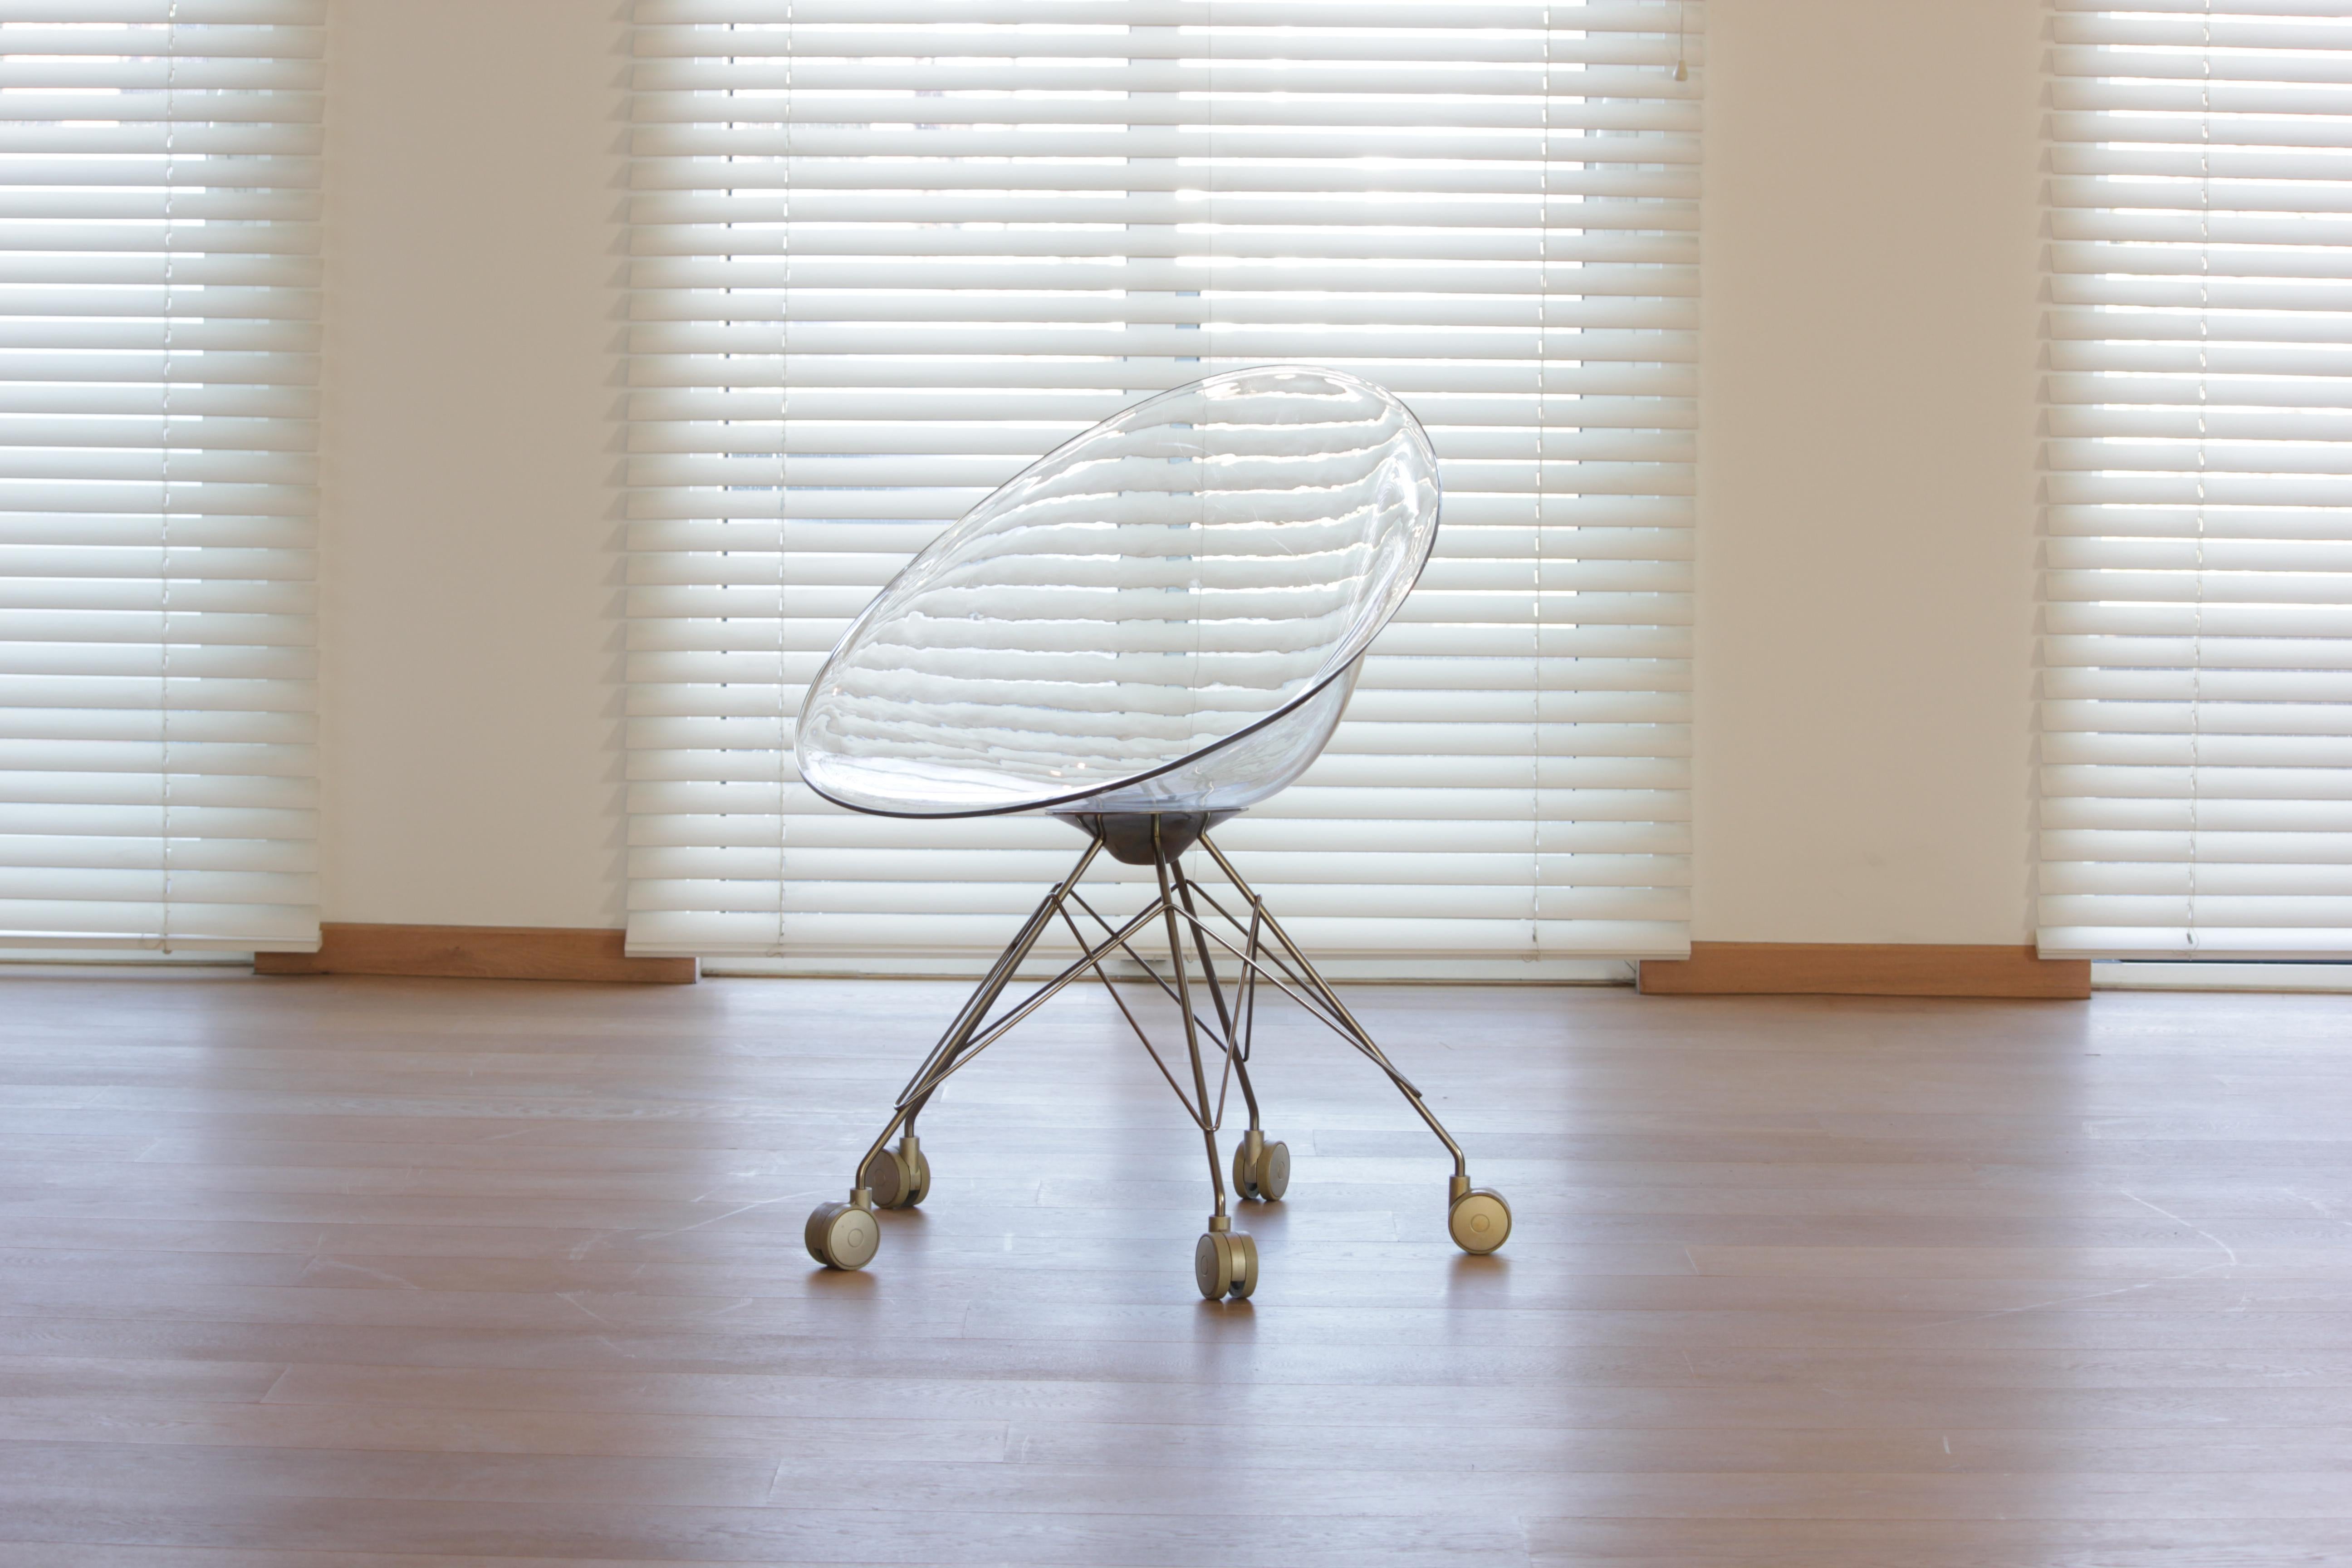 Desk chair by Philippe Starck for Kartell

1990s

'EroS'

Italy

83.5cm high, 61cm wide, 57cm deep